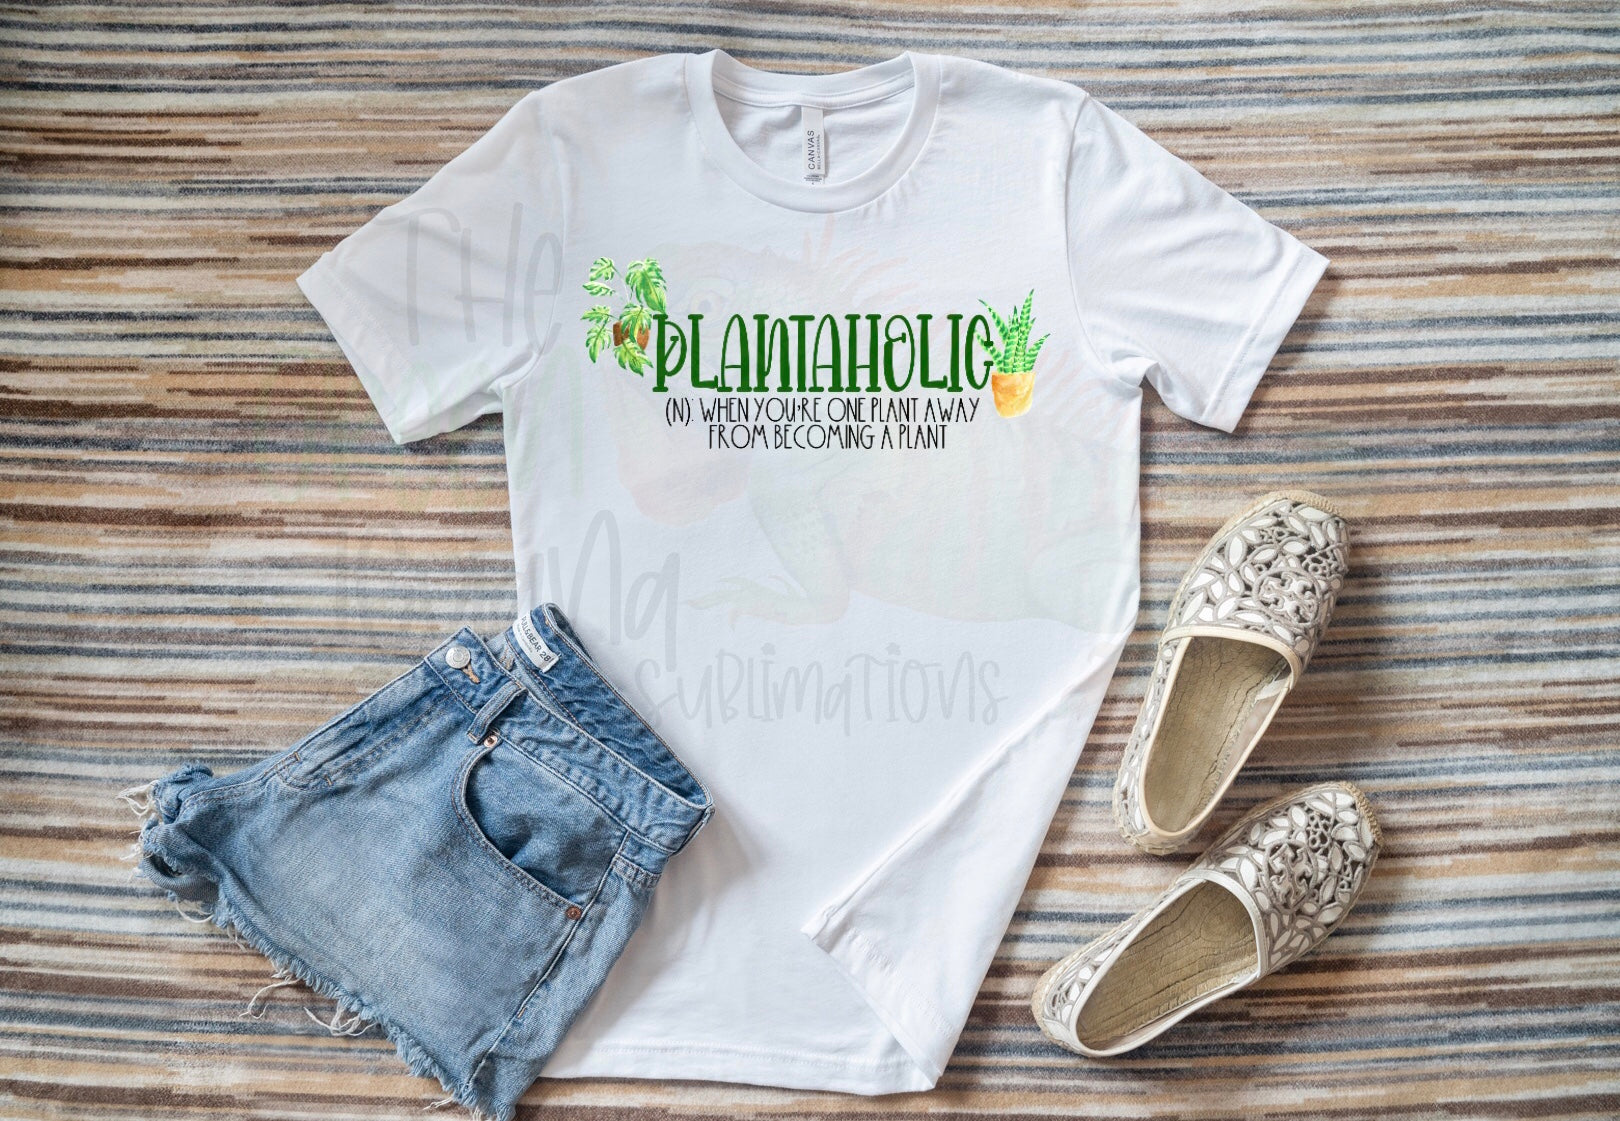 Plantaholic. When you’re one plant away from becoming a plant DIGITAL